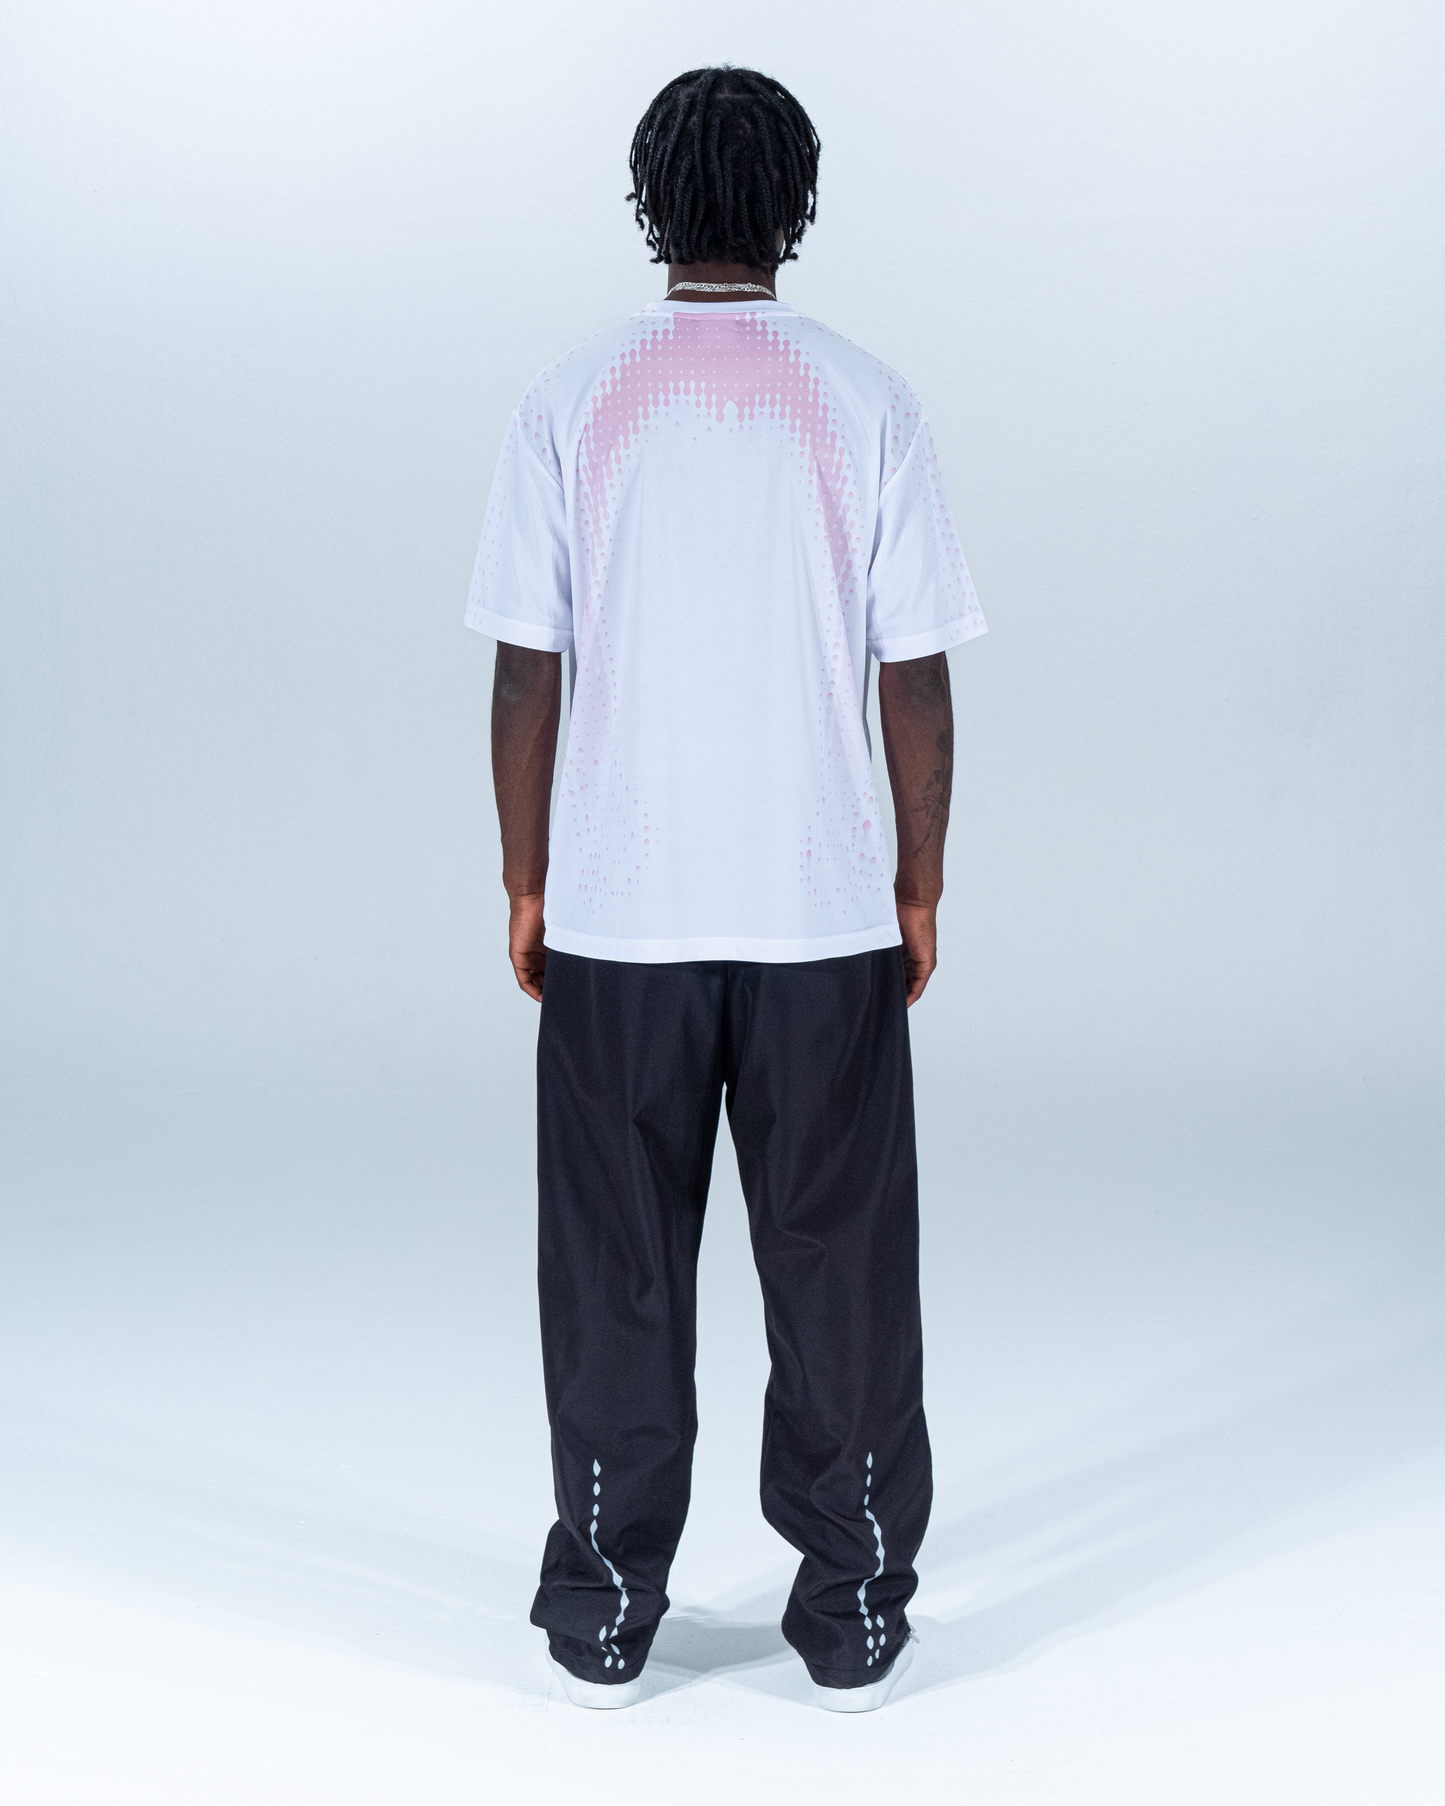 Streetrunner bubble tee pink